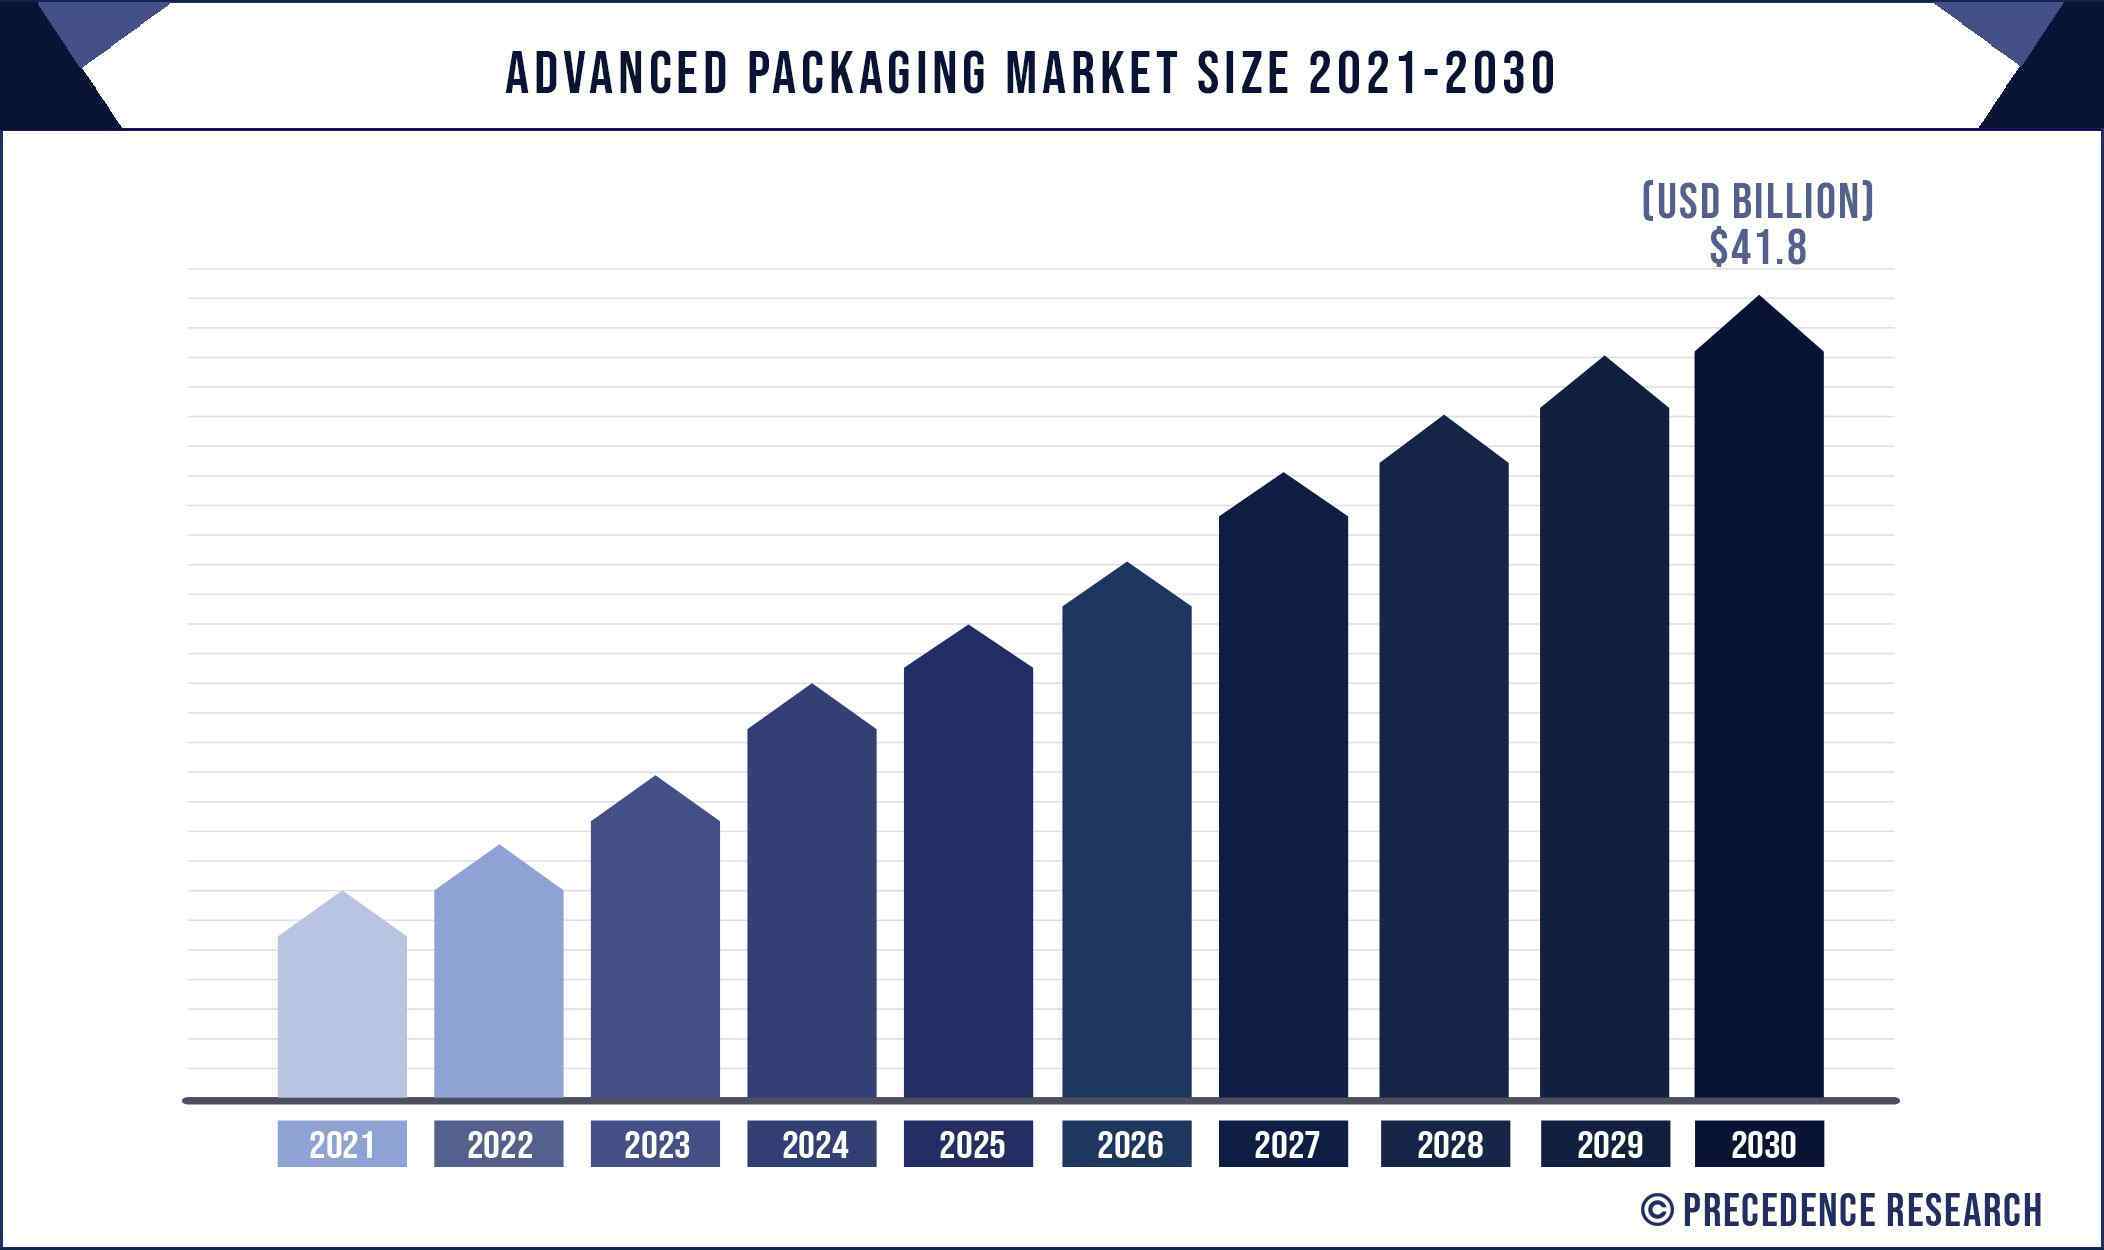 Advanced Packaging Market Size 2021 to 2030